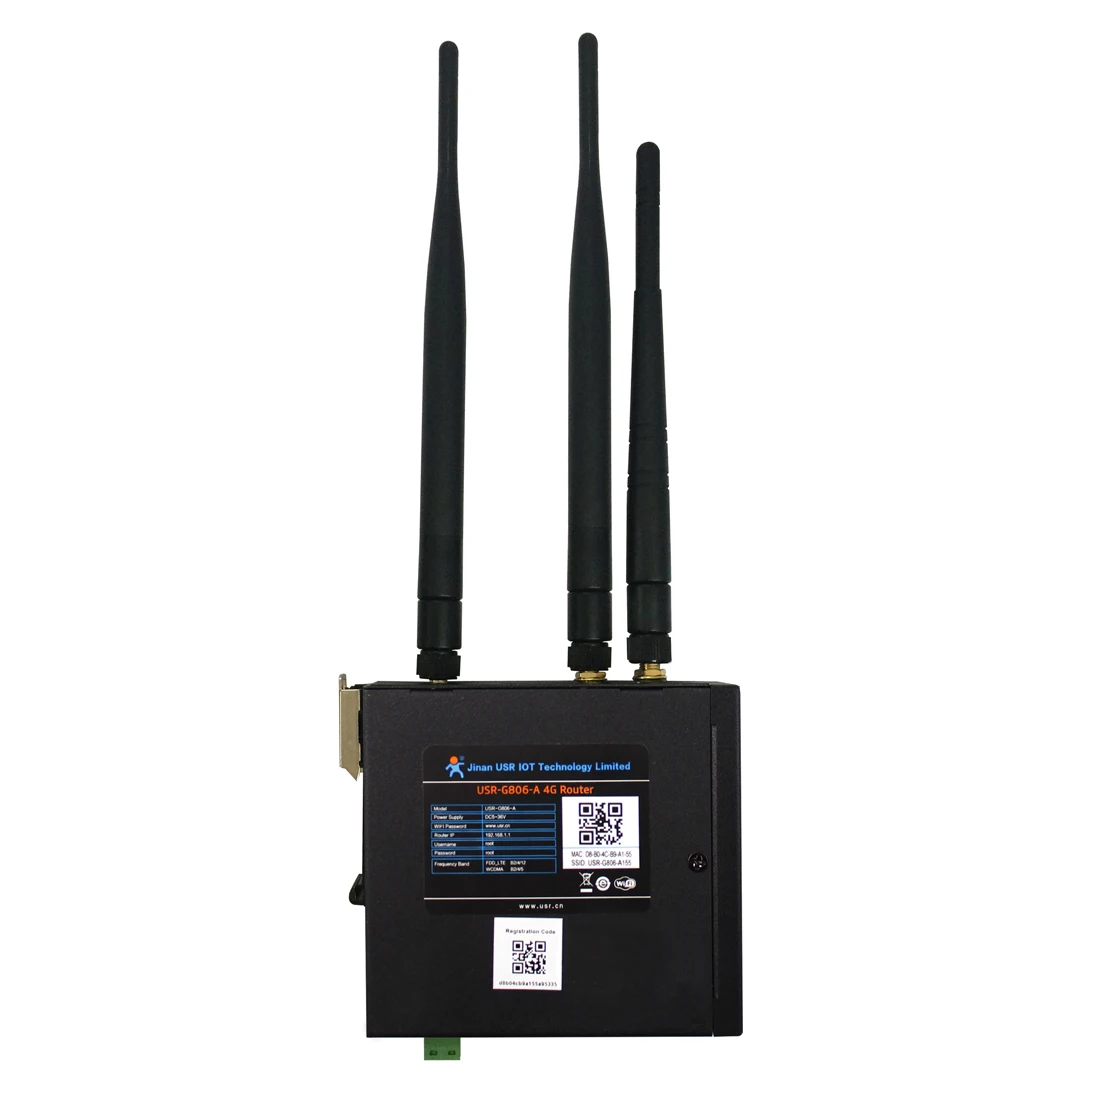 USR-G806 3G 4G Routers Support 802.11b/g/n and SIM Card Slot with APN VPN 